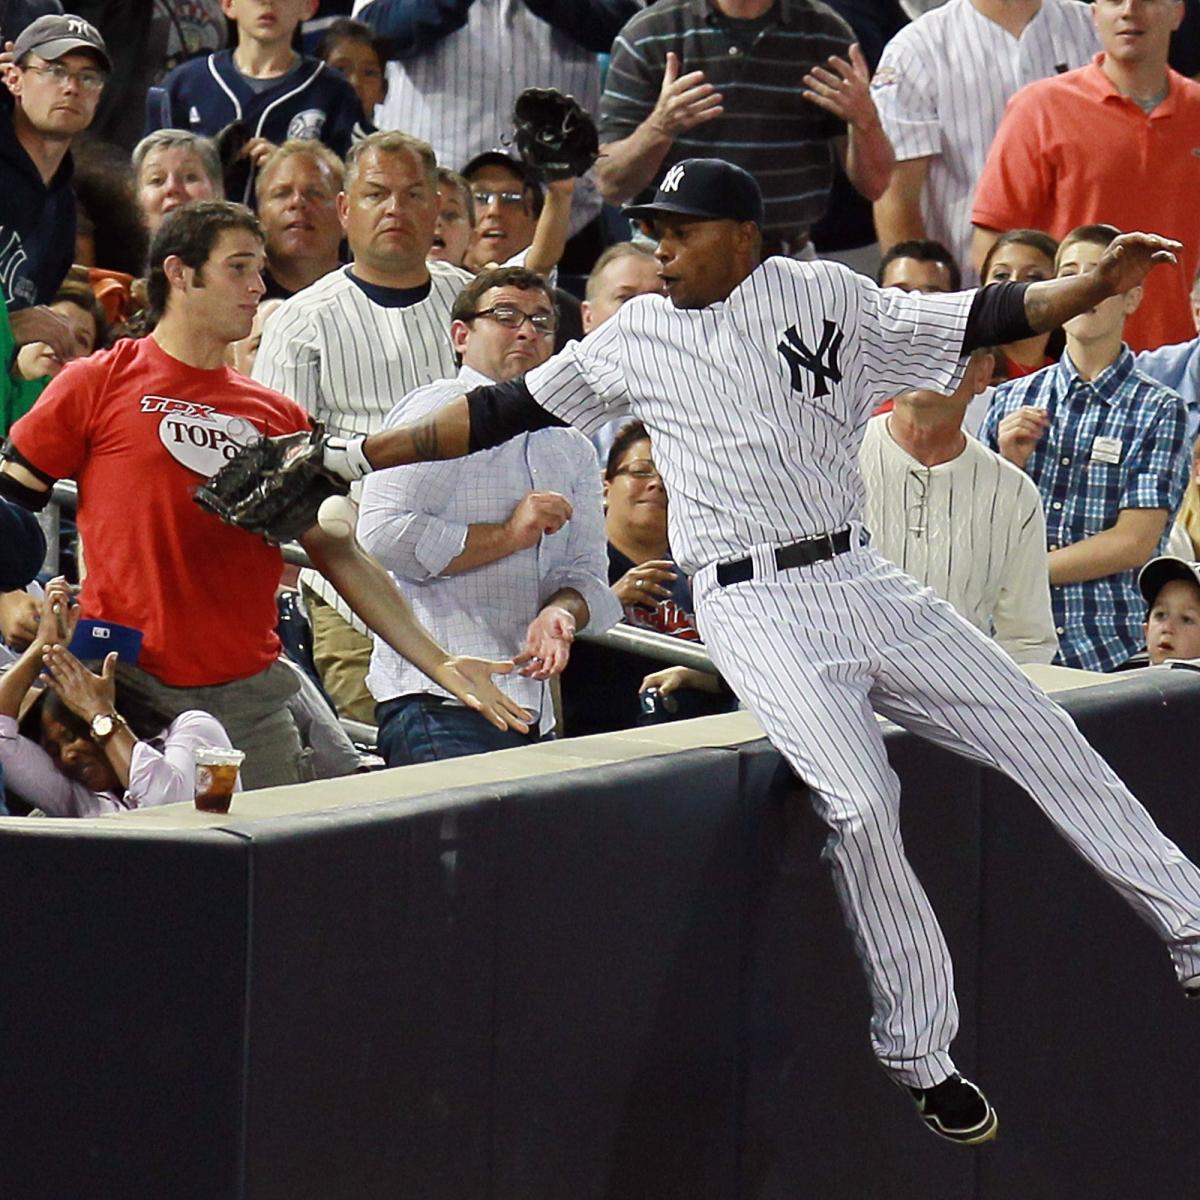 Mets fan interferes during Yankees game with catch over wall